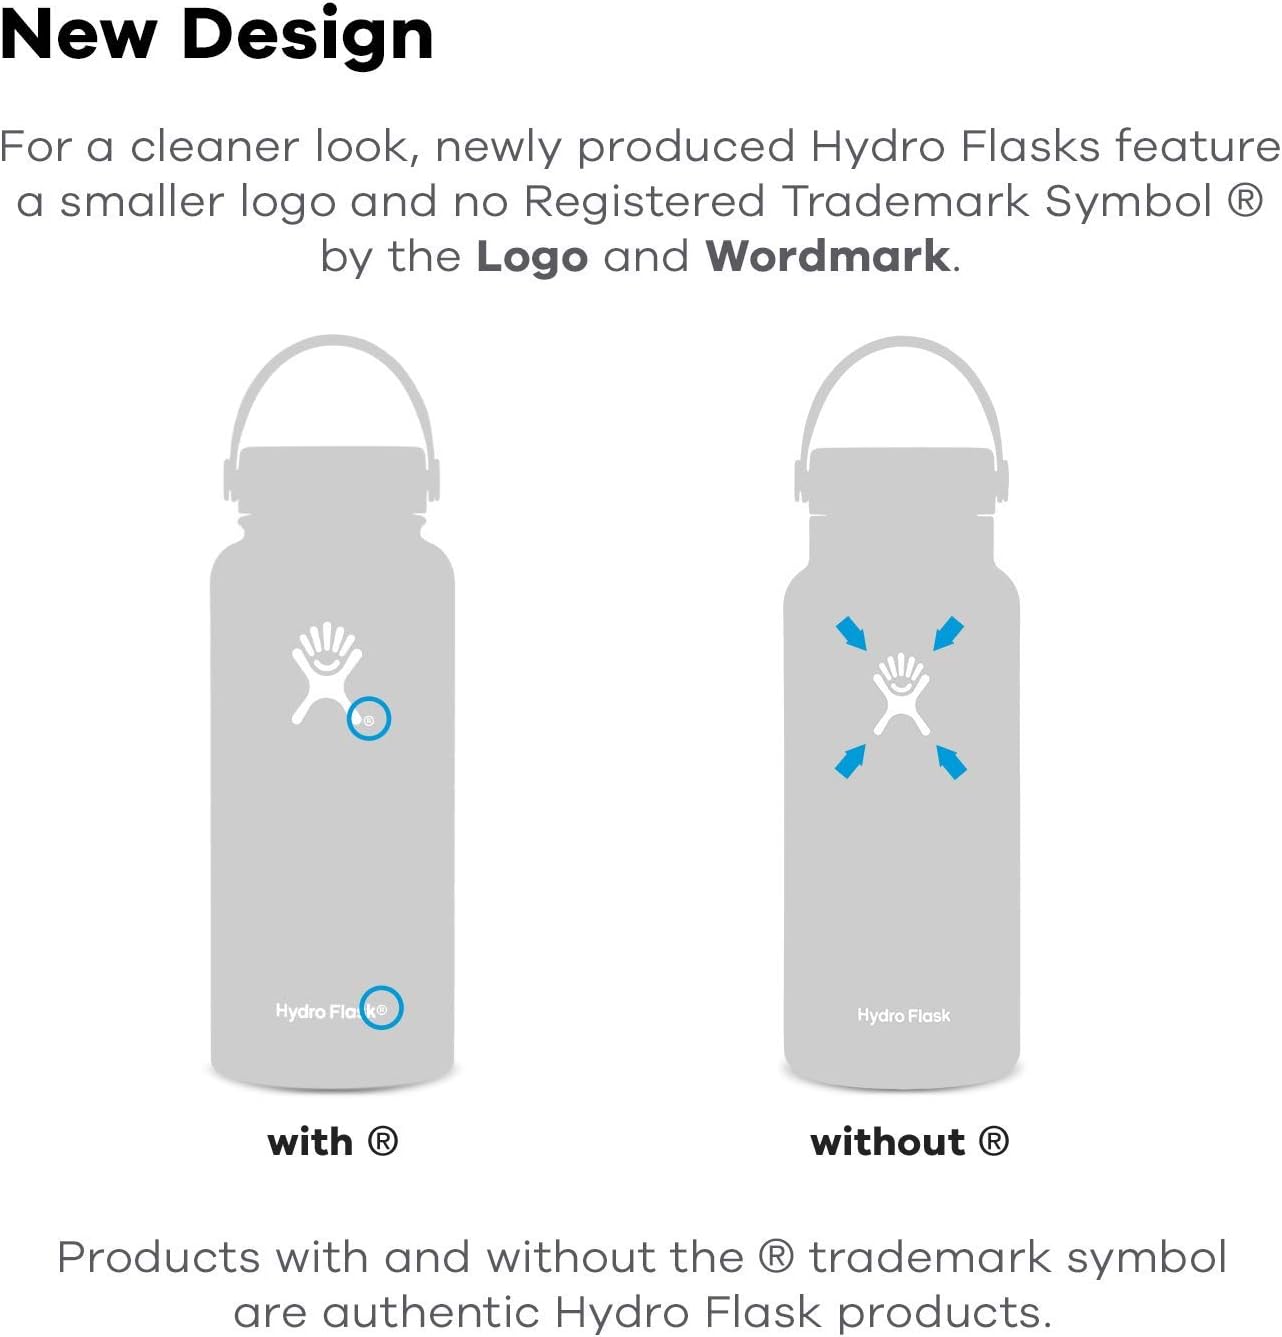 Wide Mouth Insulated Bottle 